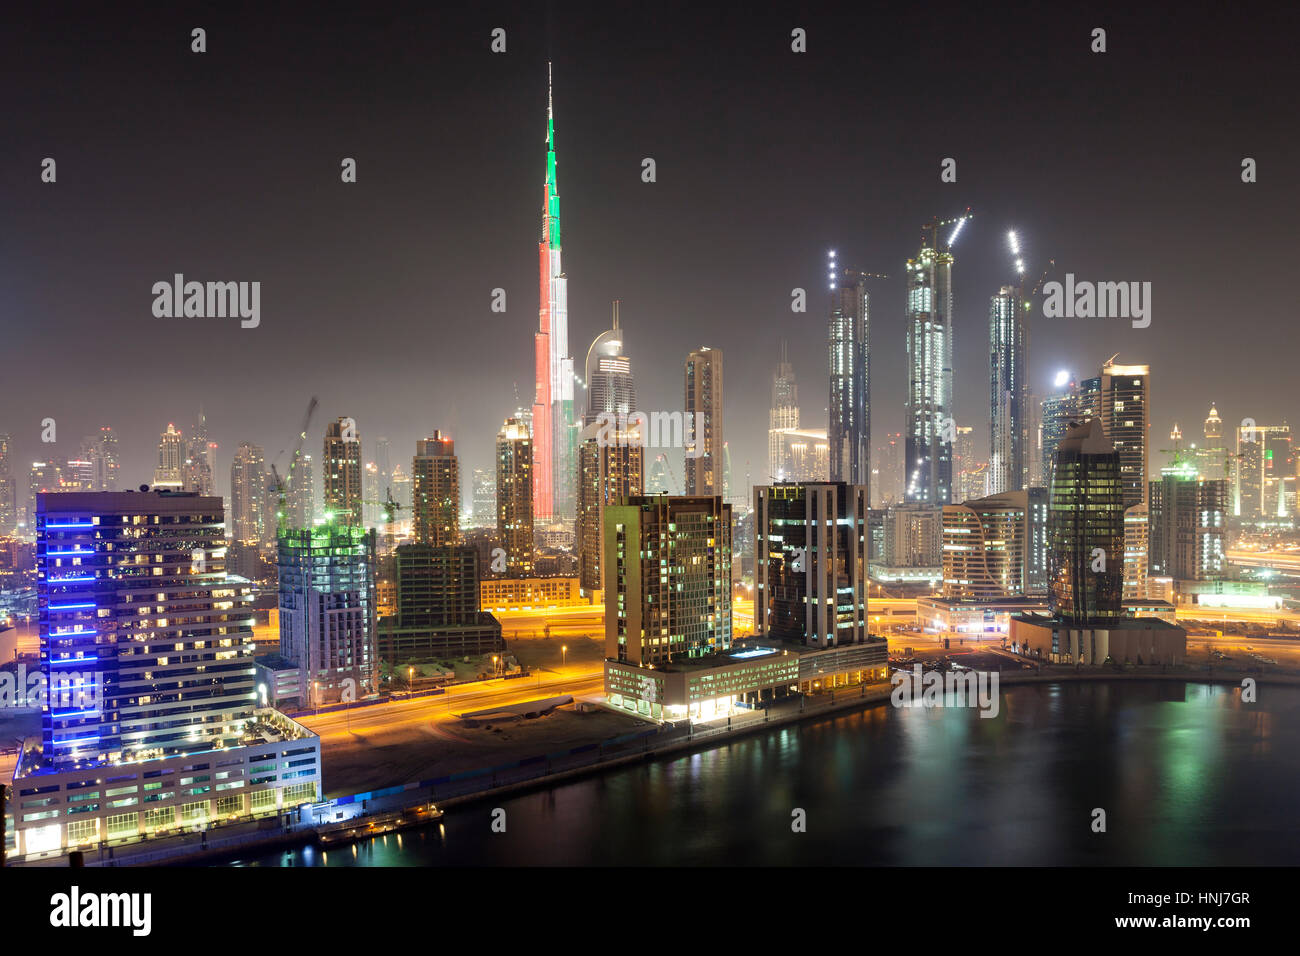 Skyline of Dubai downtown at night. Burj Khalifa illuminated in national colors of the UAE - green, red and white. United Arab Emirates, Middle East Stock Photo